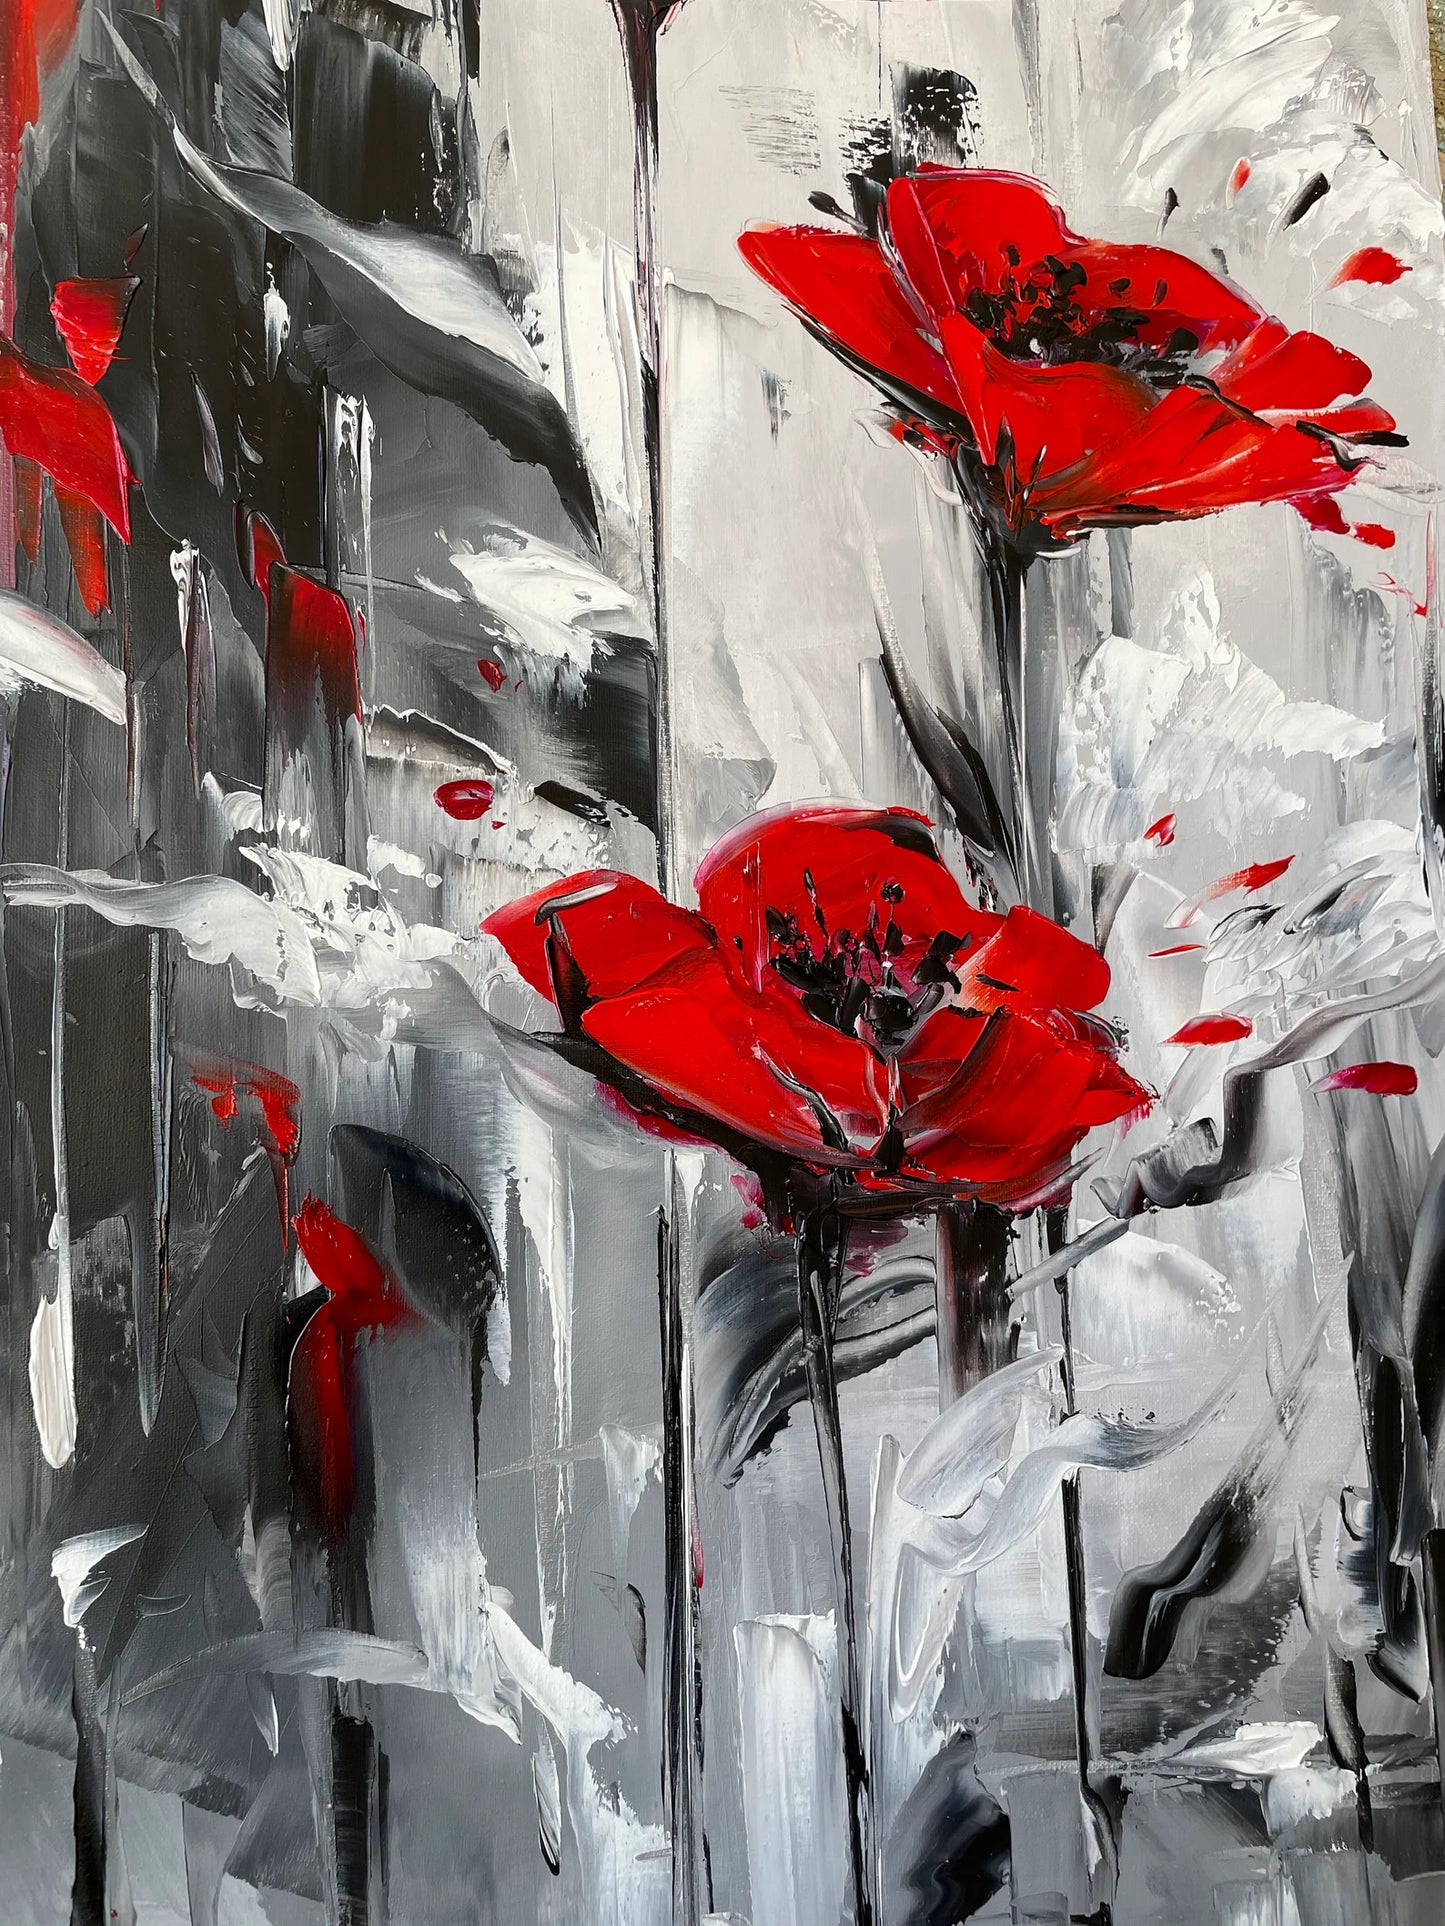 Abstract Red Poppies Painting on Canvas, Poppy Flower Wall Art, Large Abstract Floral Oil Painting